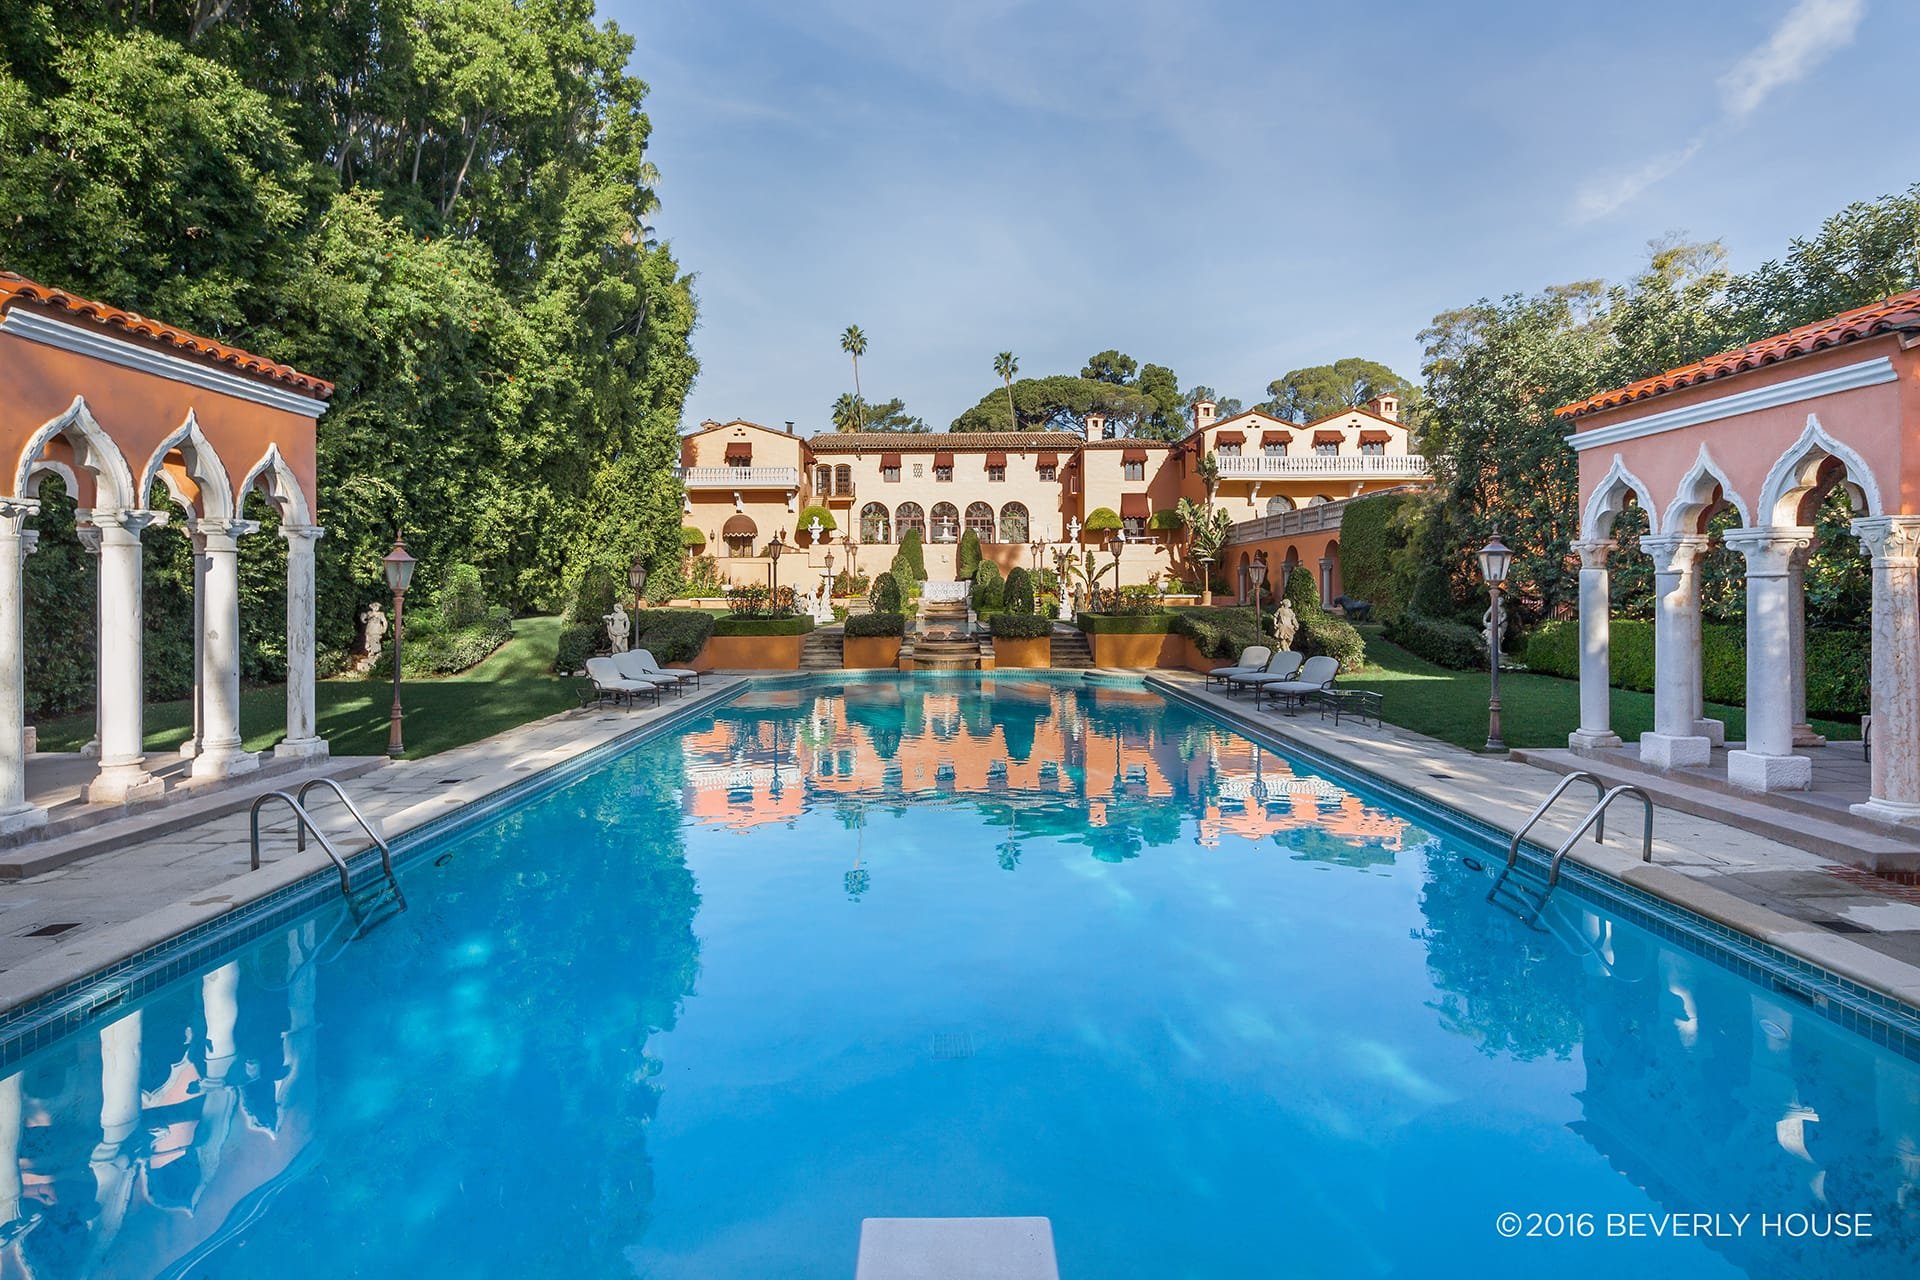 The Beverly house is an American legend known for it's starring roles in the Godfather and The Body Guard.